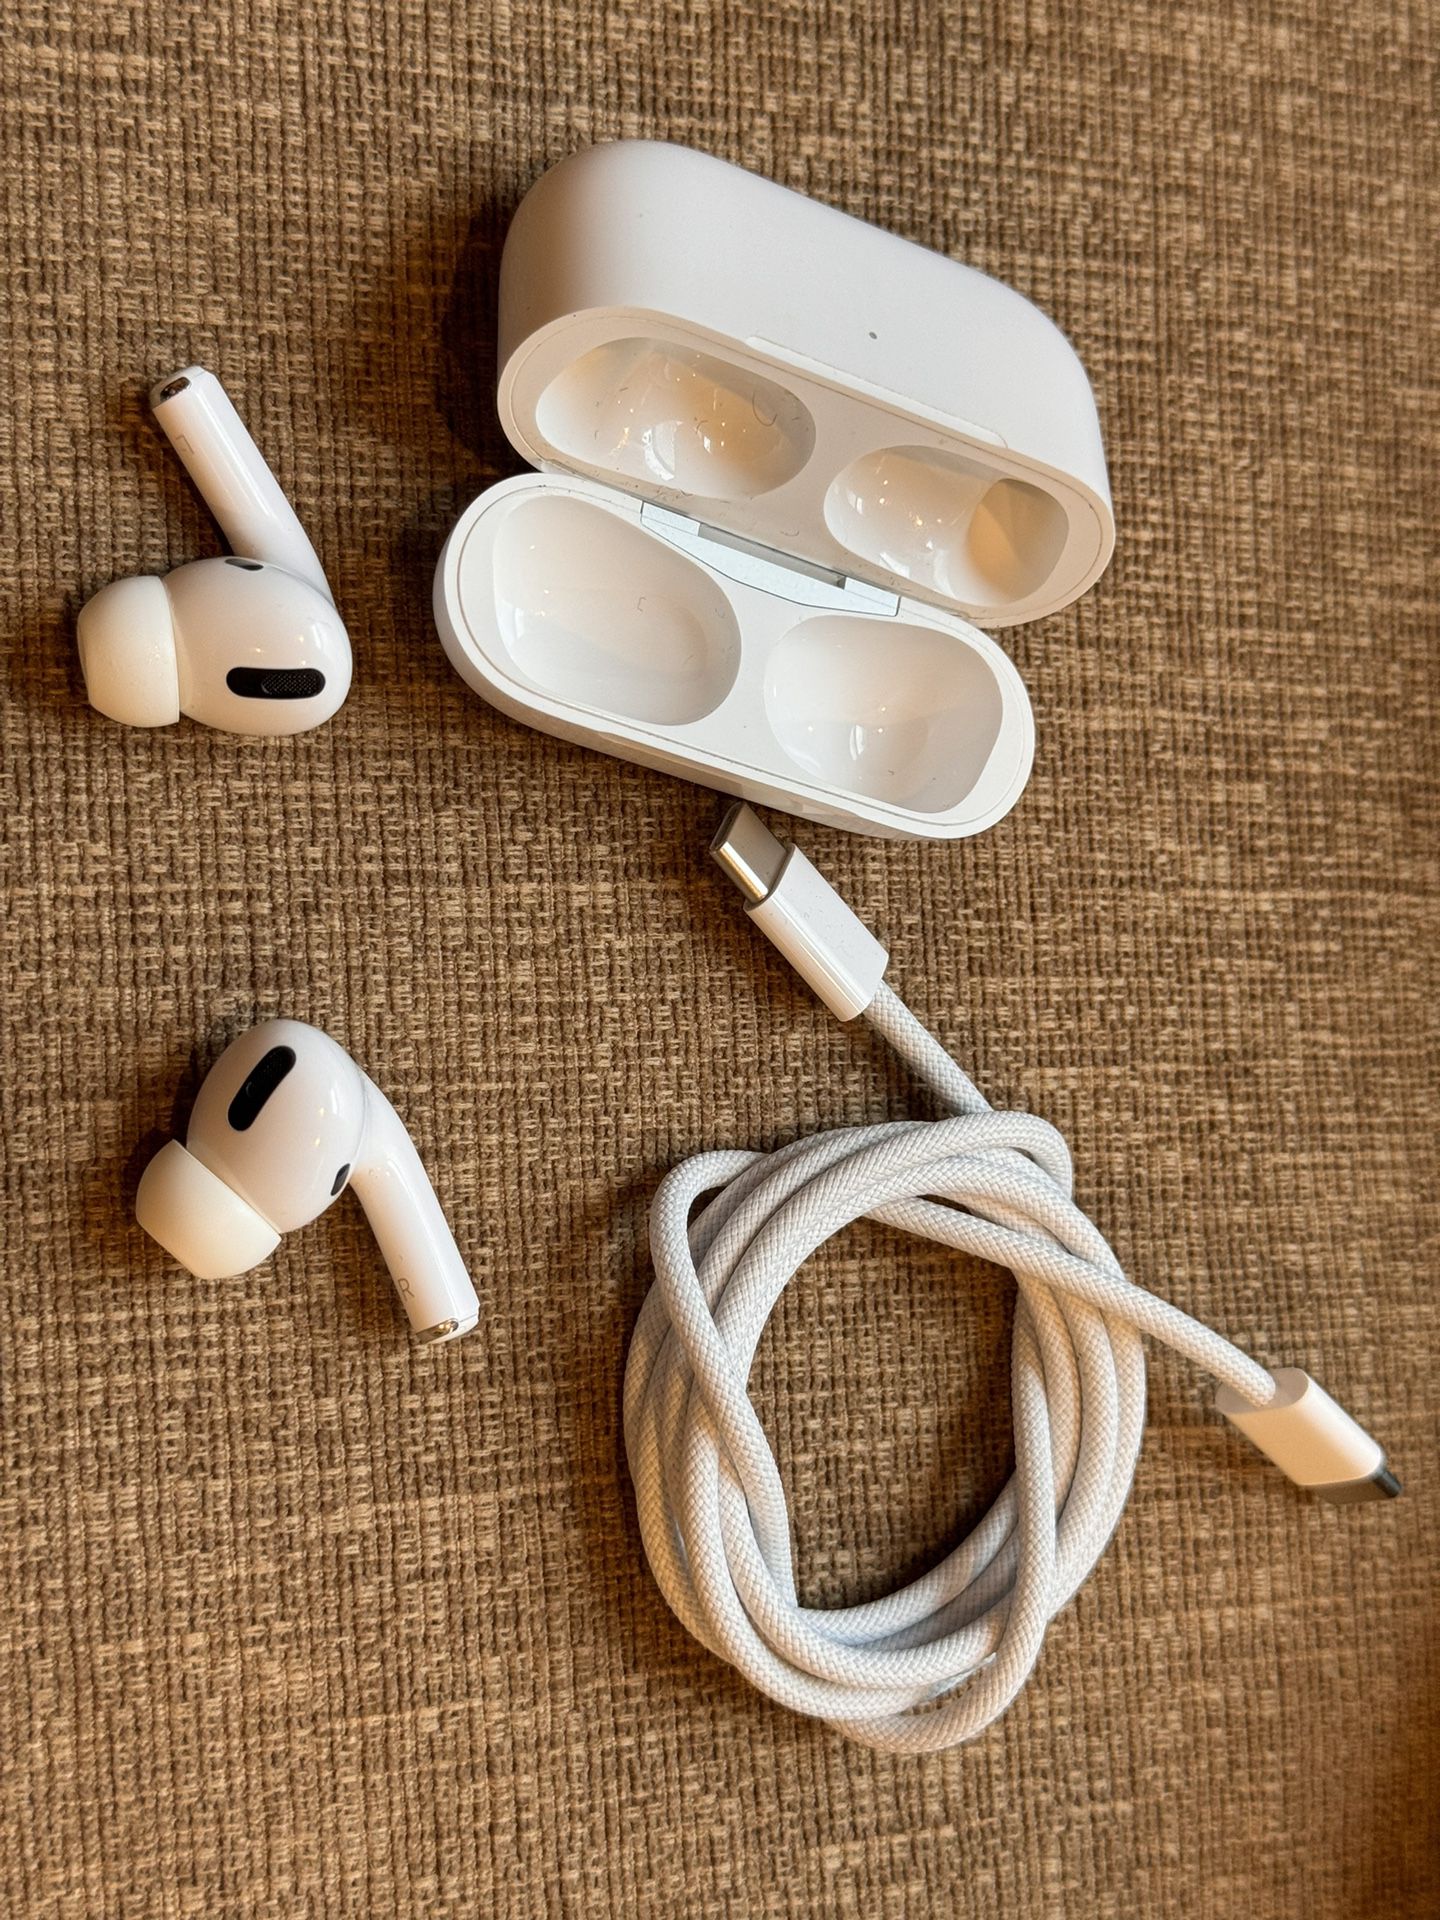 AirPods Pro Mind Condition/ Priced To Sell Fast